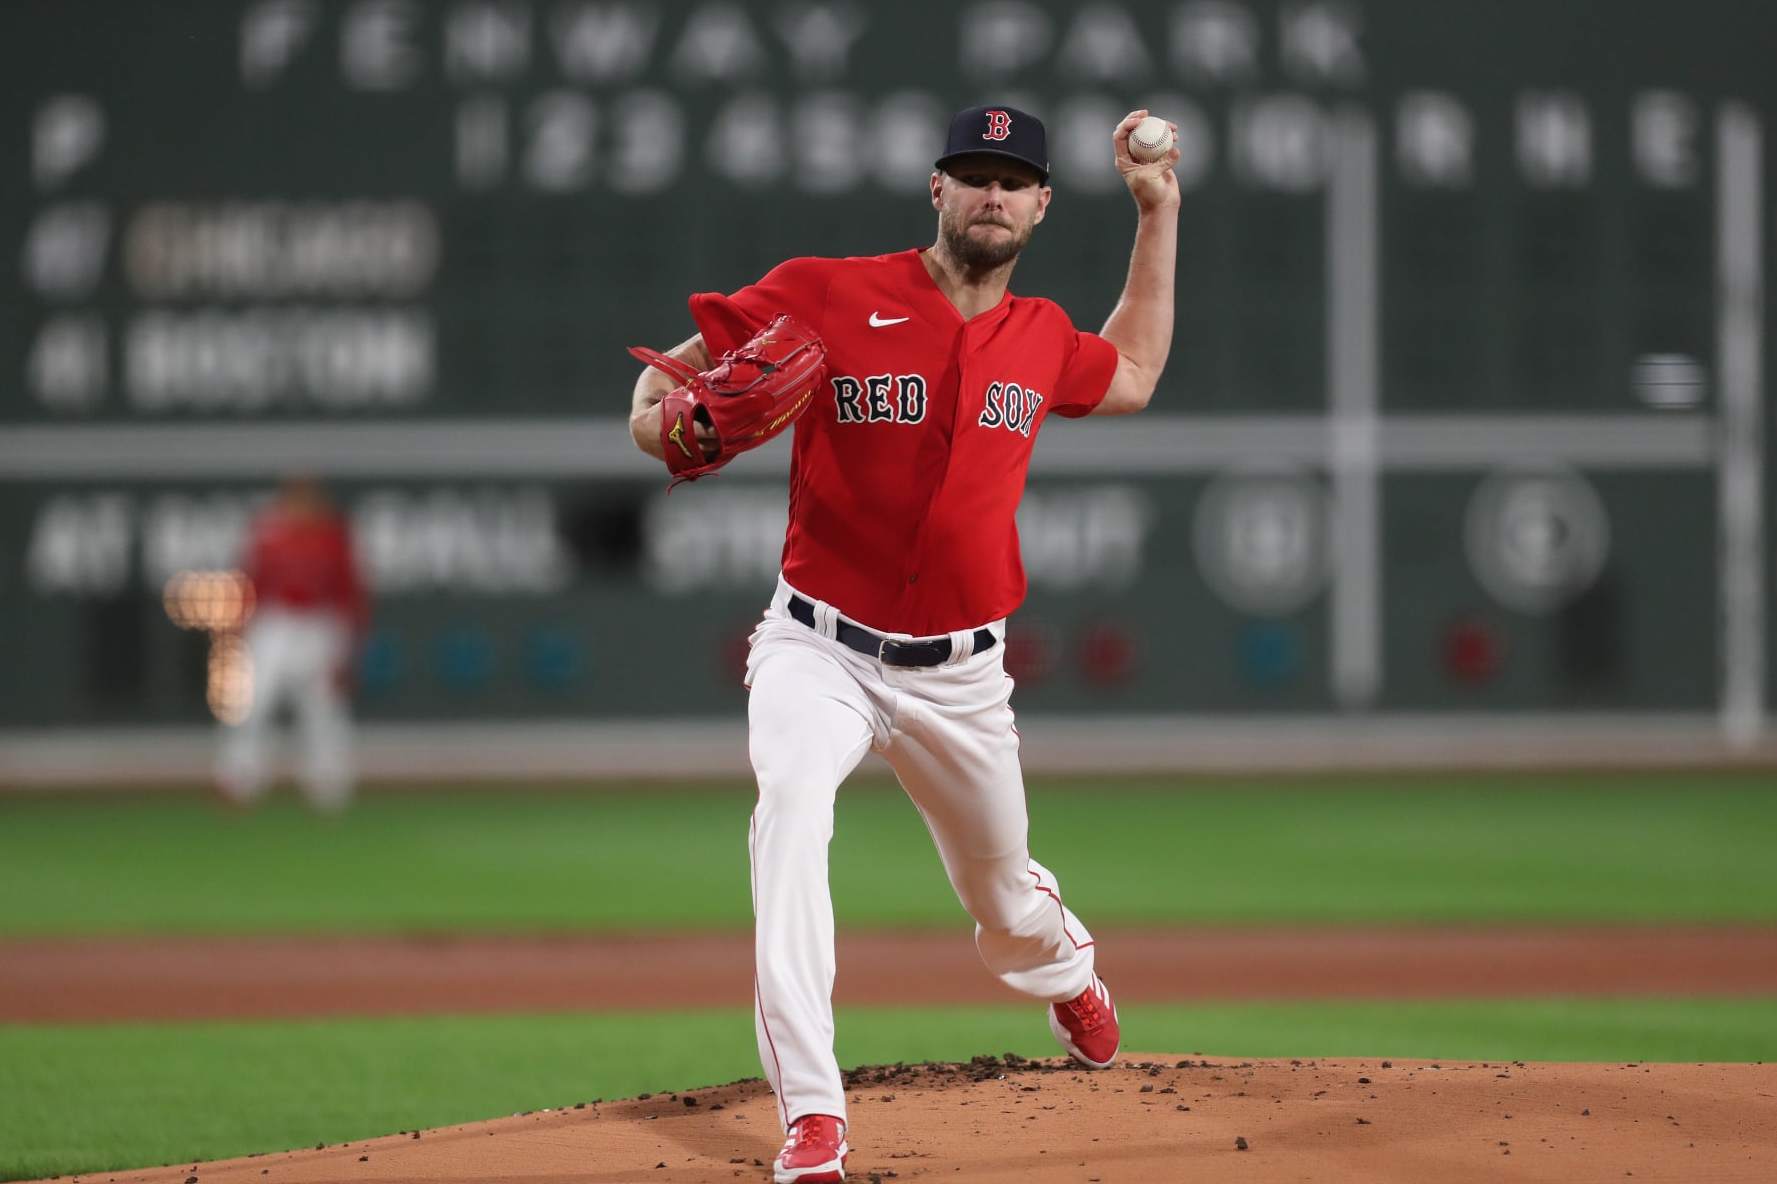 Red Sox squander strong Paxton start, lose to Rockies 4-3 in 10